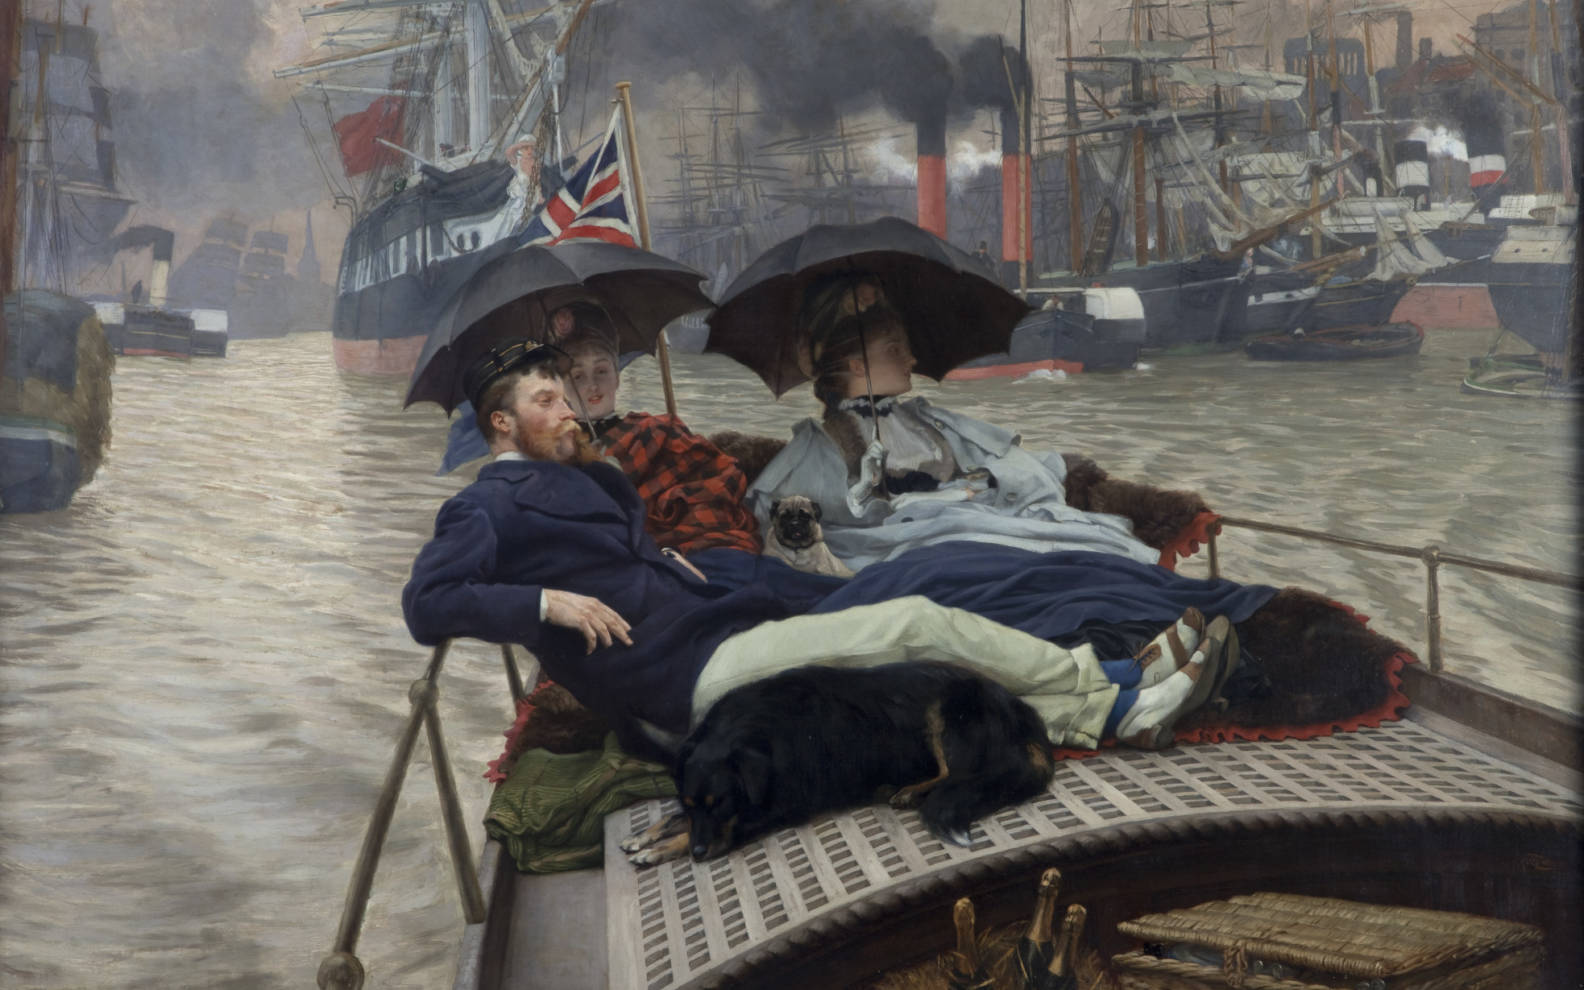 On the Thames (How Happy I Could Be with Either?) by James Tissot - 1876 - 74.8 x 118 cm Hepworth Wakefield